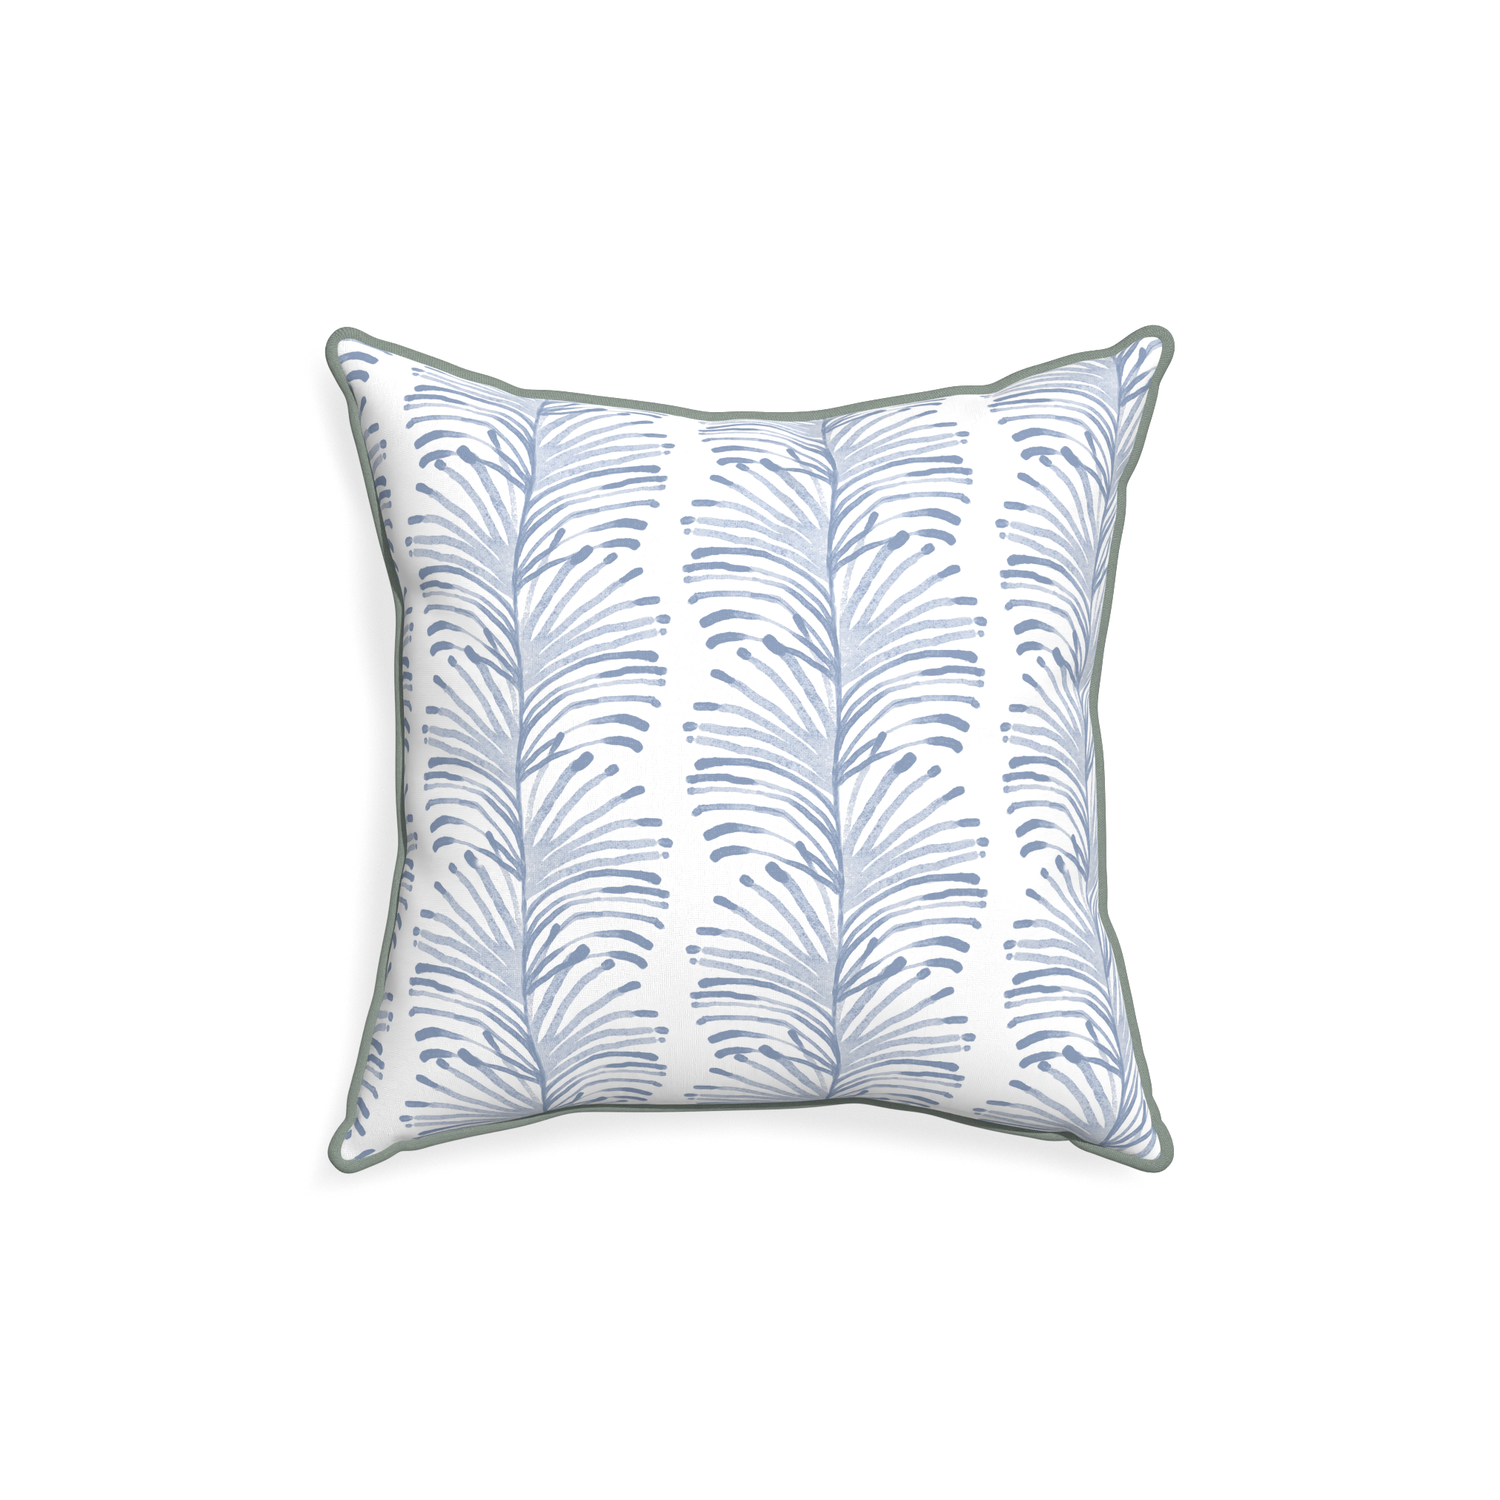 18-square emma sky custom sky blue botanical stripepillow with sage piping on white background